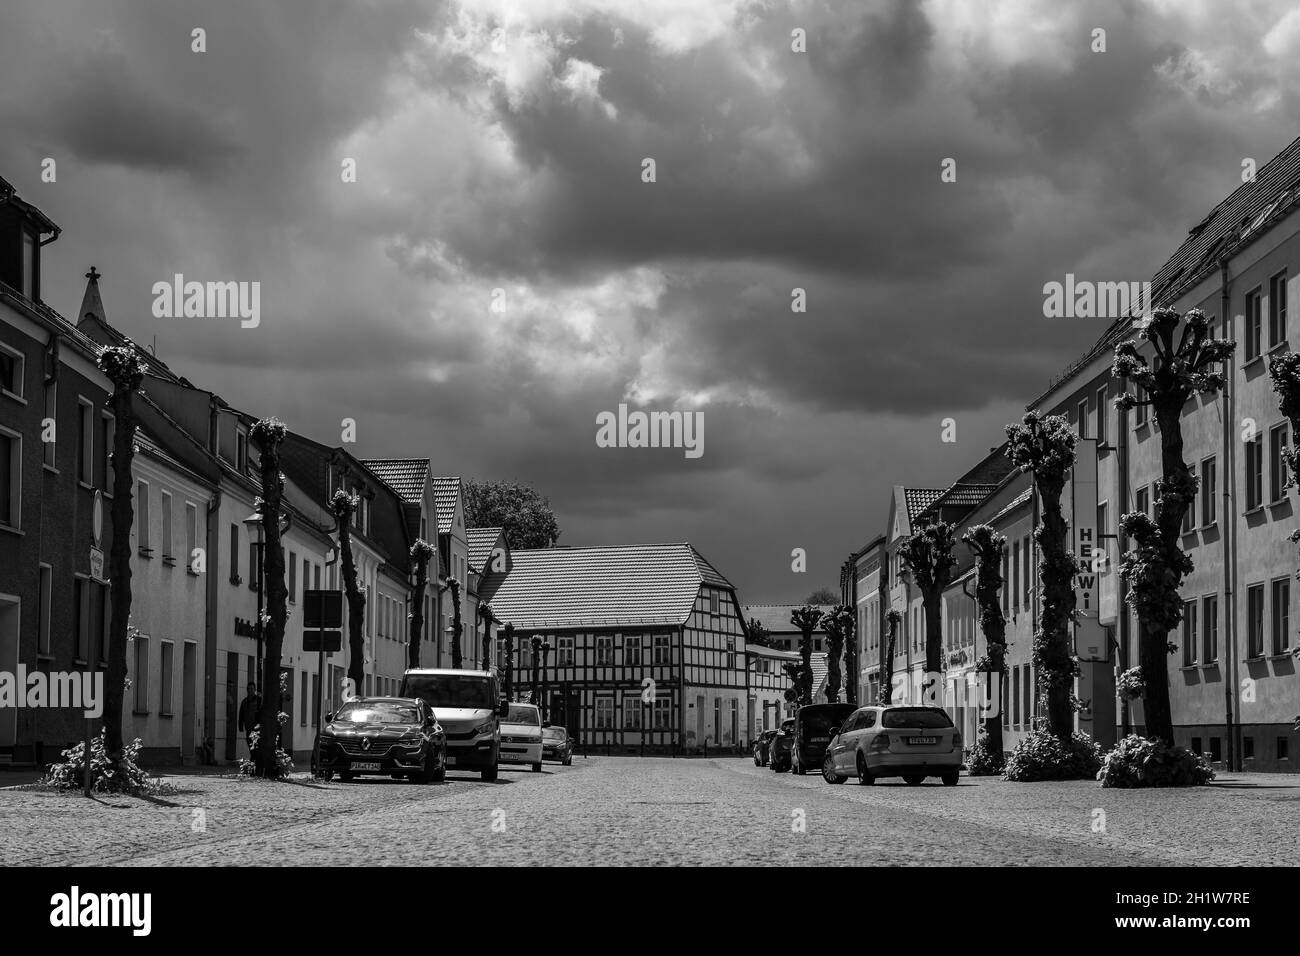 JUETERBOG, GERMANY - MAY 23, 2021: Streets of old town. Juterbog is a historic town in north-eastern Germany, in the district of Brandenburg. Black an Stock Photo